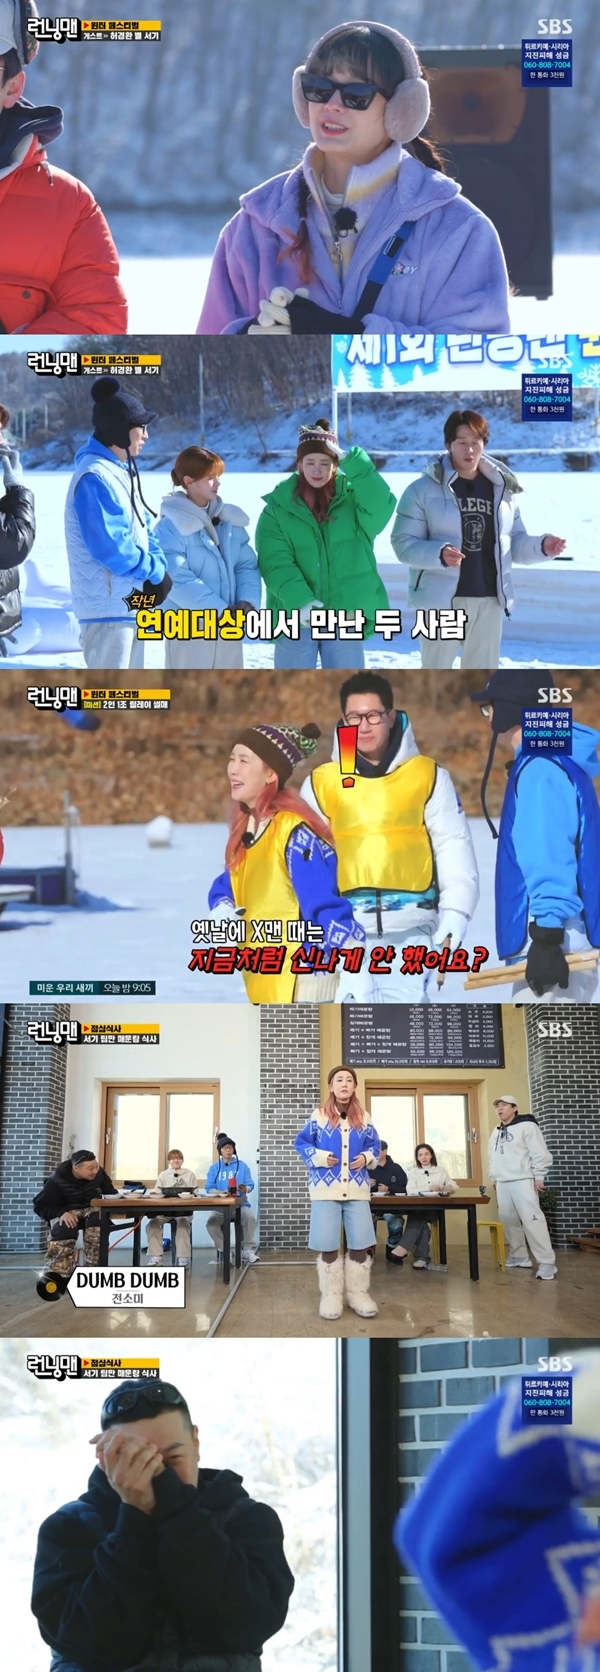 The first Running Man Winter festival was held on the 19th at the SBS  ⁇ Running Man ⁇ . Matching the name of the festival, there was an invited singer on the spot, M.O.M.Ji Suk-jin previously won the Hope ticket at the time of his 633rd race win; Ji Suk-jin used the Hope ticket to promote M.O.M. new songs, but the terms of the contract were set to only perform celebratory performances.Ji Suk-jin, Park Jae-jung, Won Stein and KCM came on stage.Yoo Jae-Suk took a tube somewhere and intuited it in the first row, and Ji Suk-jin looked down at it from the stage and laughed to say that it was like a national song.After M.O.M left, three real guests, Singer Shu Qi, Heo Kyung-hwan, and three stars appeared. Shu Qi said that he is the youngest of FC Balladrim in the women who hit the ball.Kim Jong-kook, who is known to like soccer, admitted that he was good at soccer.The star announced that he released his regular 6th album, which he prepared for a long time, and he also showed his title song  ⁇   ⁇   ⁇   ⁇   ⁇   ⁇   ⁇  Love Live!The star continued his interview with Yoo Jae-suk shortly after Love Live!, Haha, who stood far away, seemed nervous and restless alone.Yoo Jae-Suk said that he had nothing to do with you, and he laughed when he said that he should leave the star alone.The star also showed the newjins  ⁇   ⁇   ⁇   ⁇  dance. One laughed as if he was crazy when he saw the dance, but he screamed and ran away and laughed.The first game was a two-person relay sled. Guest and members were divided into Shu Qi team, Heo Kyung-hwan team, and star team to play the game.The star was very excited as he proceeded with the game, and Yoo Jae-Suk laughed when he asked if he had not been as excited as he was when he was in the old days.The team that won the first game was the Shu Qi team, which included Yoo Jae-Suk and Haha, and the three teams chose a menu of freshwater Maeun-tang and charcoal duck Guo Wengui.If there was only one team arriving, we could have a delicious lunch, and if there were more than two teams, we could only eat the winning team through Battle.The Heo Kyung-hwan team chose the charcoal duck Guo Wengui; the other two teams chose freshwater Maeun-tang; and the Jeon So-min gave Heo Kyung-hwan a talk while eating the duck Guo Wengui.However, Heo Kyung-hwans talk was not confident and did not satisfy Jeon So-min.The battle took place in the freshwater Maeun-tang store where the two teams gathered, and Shu Qis team won again. The star went out to dance for a little Maeun-tang.Haha hid in a corner and watched his wifes dance, causing laughter.After lunch, the three teams gathered in the ice reservoir again, this time playing soccer on the ice.Shu Qi team had 3 dogs, Heo Kyung-hwan team and star team had to catch 7 dogs before they could leave.Haha was encouraged by the members to give a kiss to the star who caught the smelt. In the end, Haha approached the star and pulled the eye-catching with a back hug and a kiss on the crown.On the other hand, the first team to catch the smelt on the day was Shu Qi team. The star team left, and the Heo Kyung-hwan team remained until the end. Kim Jong-kook said it was a curse of  ⁇   ⁇   ⁇ .